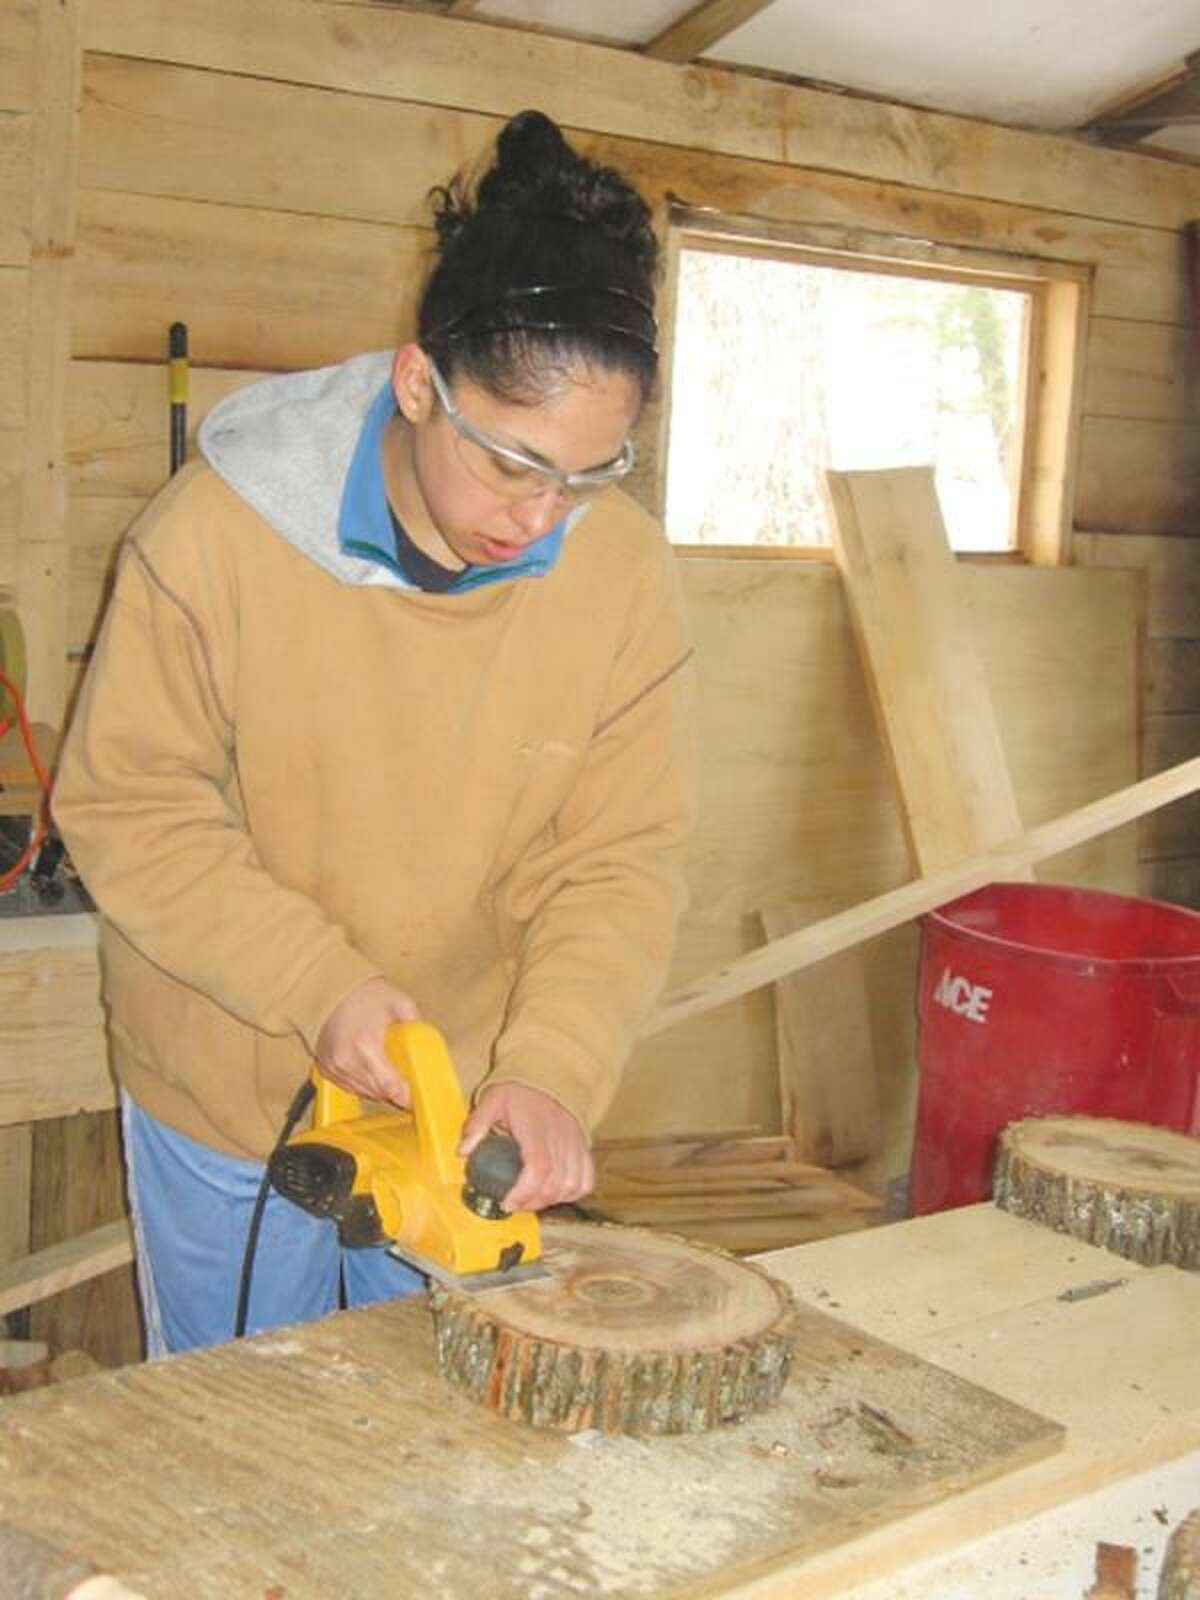 Submitted Photo Dannah Ortiz, a Quinnipiac University student, works at an Alternative Spring Break trip at the Camp Norwich YMCA of Northampton, Mass., the oldest YMCA Camp in the country.